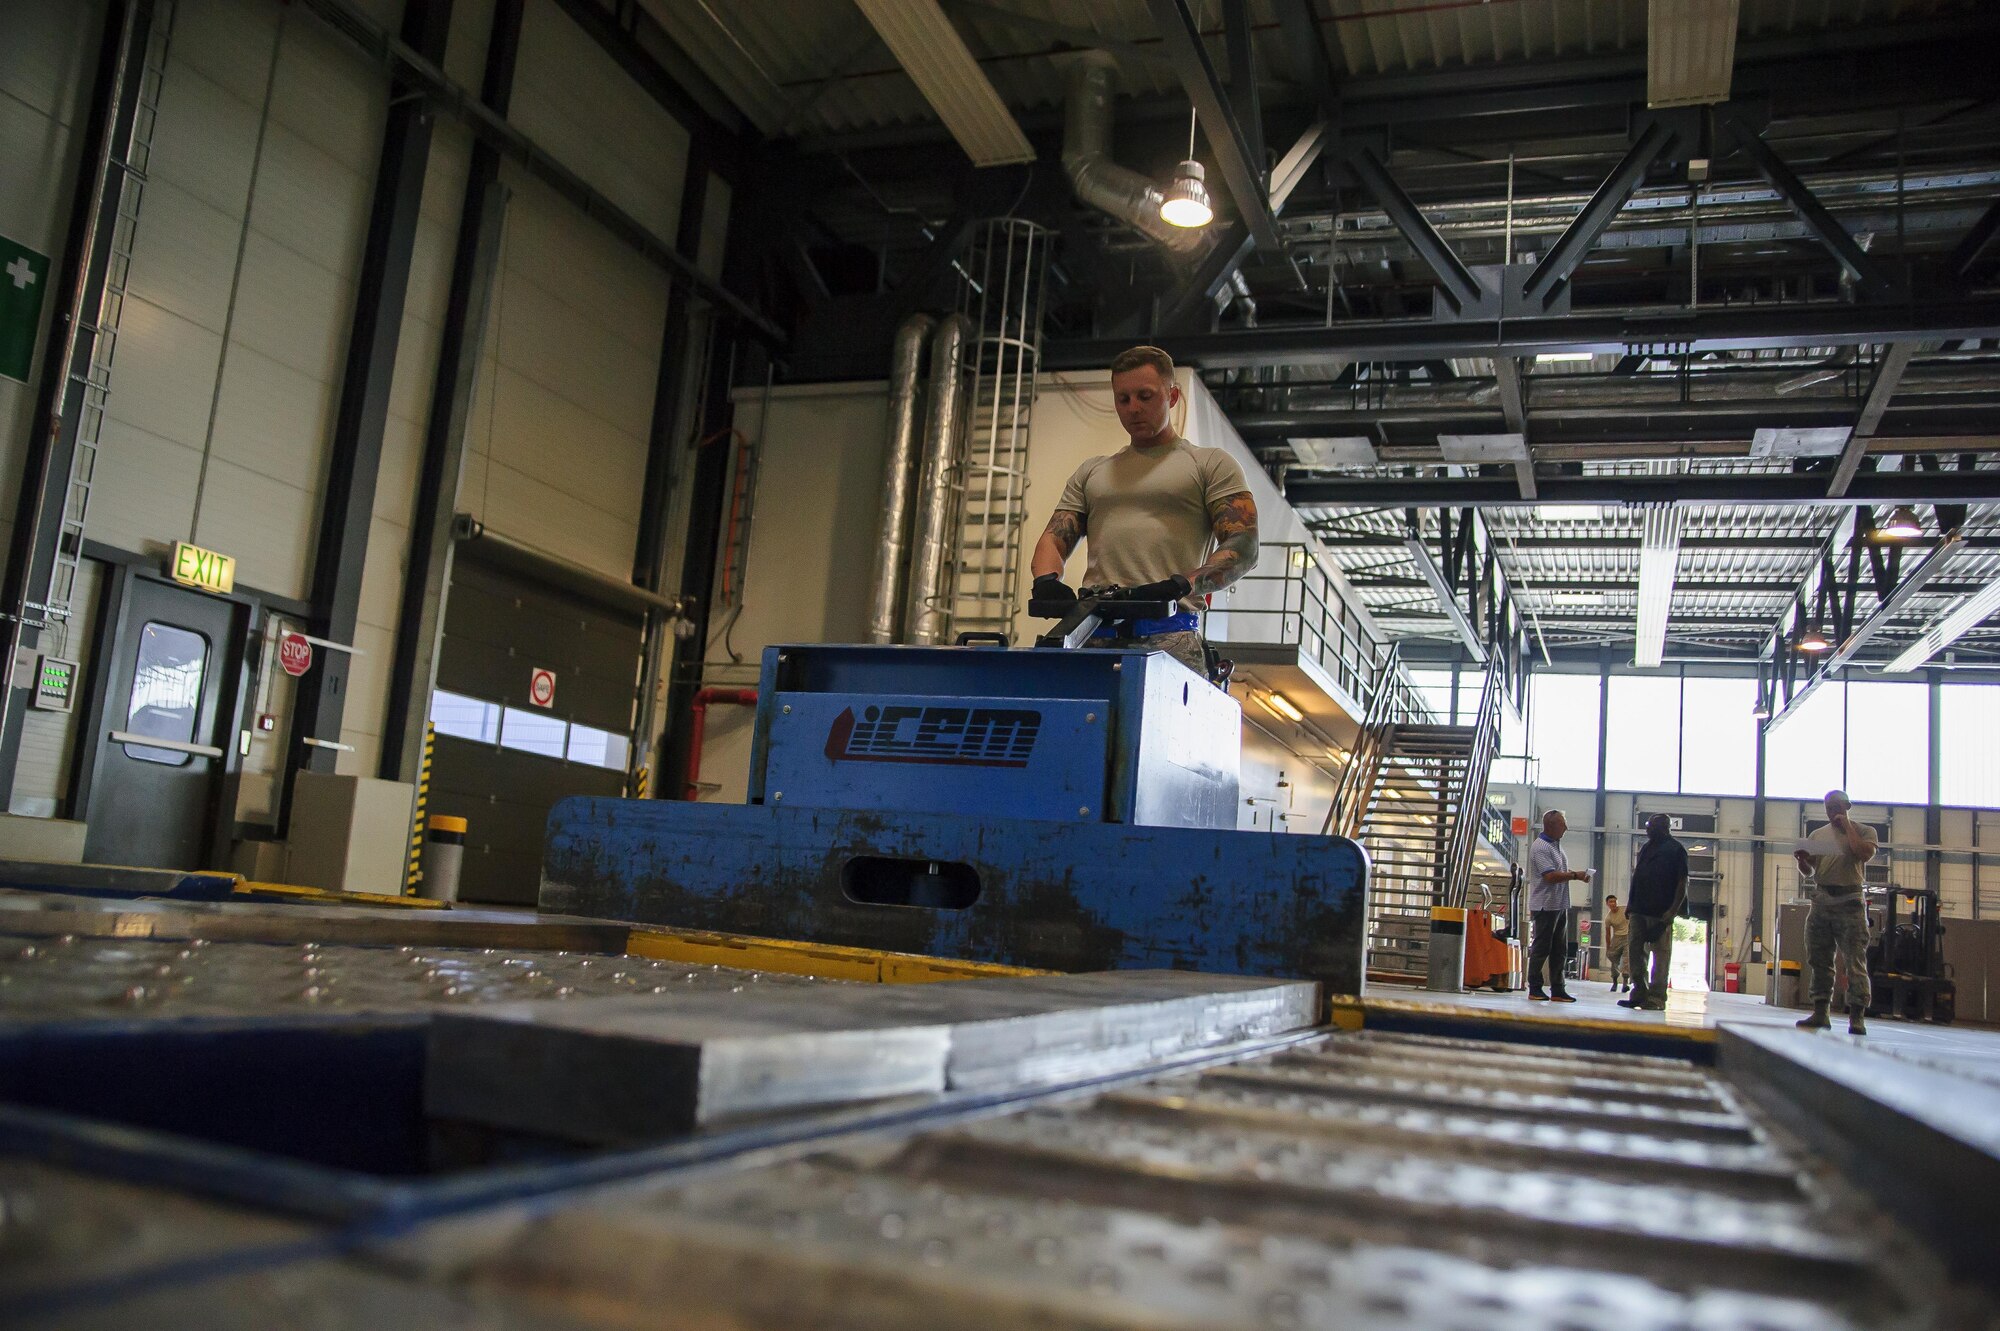 Tech. Sgt. William Anderson, an Airman from the 81st Aerial Port Squadron, Joint Base Charleston, conducts off-station annual training in the special handling section at Ramstein Air Base, Germany, July 19, 2017. Anderson’s use of this ICEM pallet mover, nicknamed “Blue Goose,” allows him to move large pallets of cargo with ease. (U.S. Air Force photo by Senior Airman Jonathan Lane)